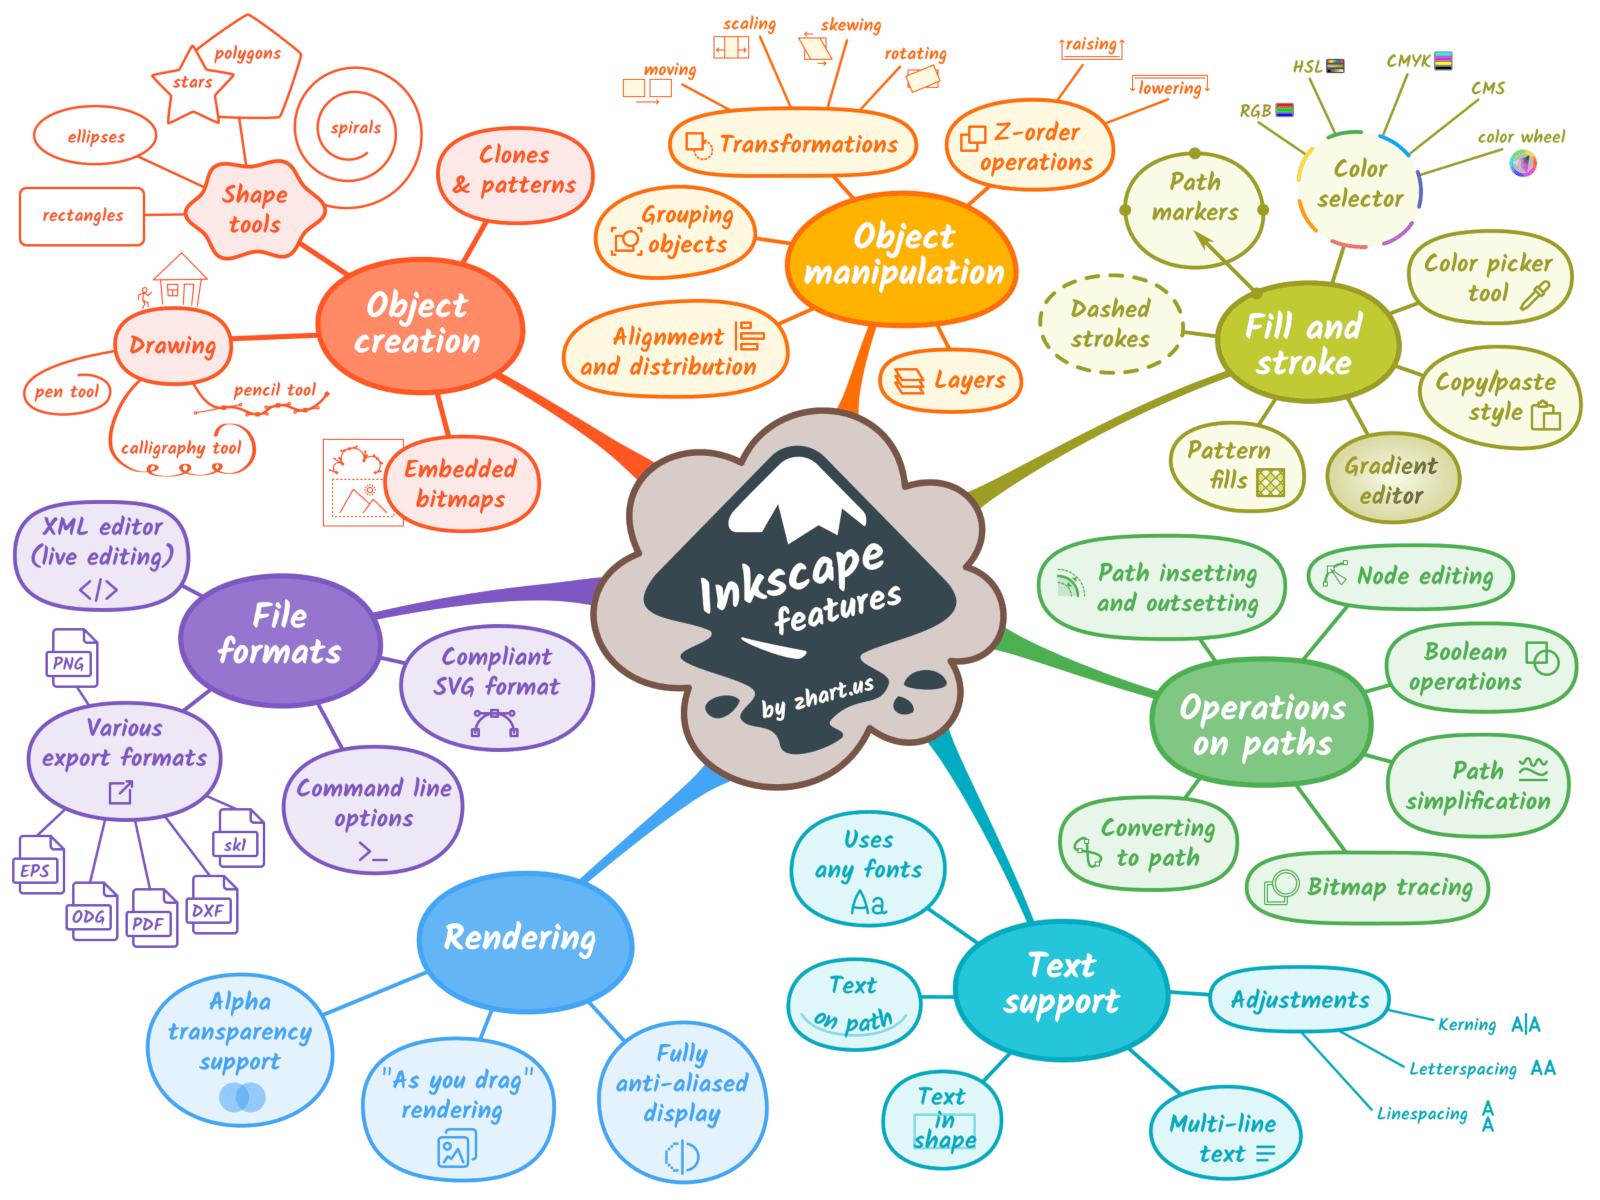 Organic mind map sample - Inkscape Features Mind Map